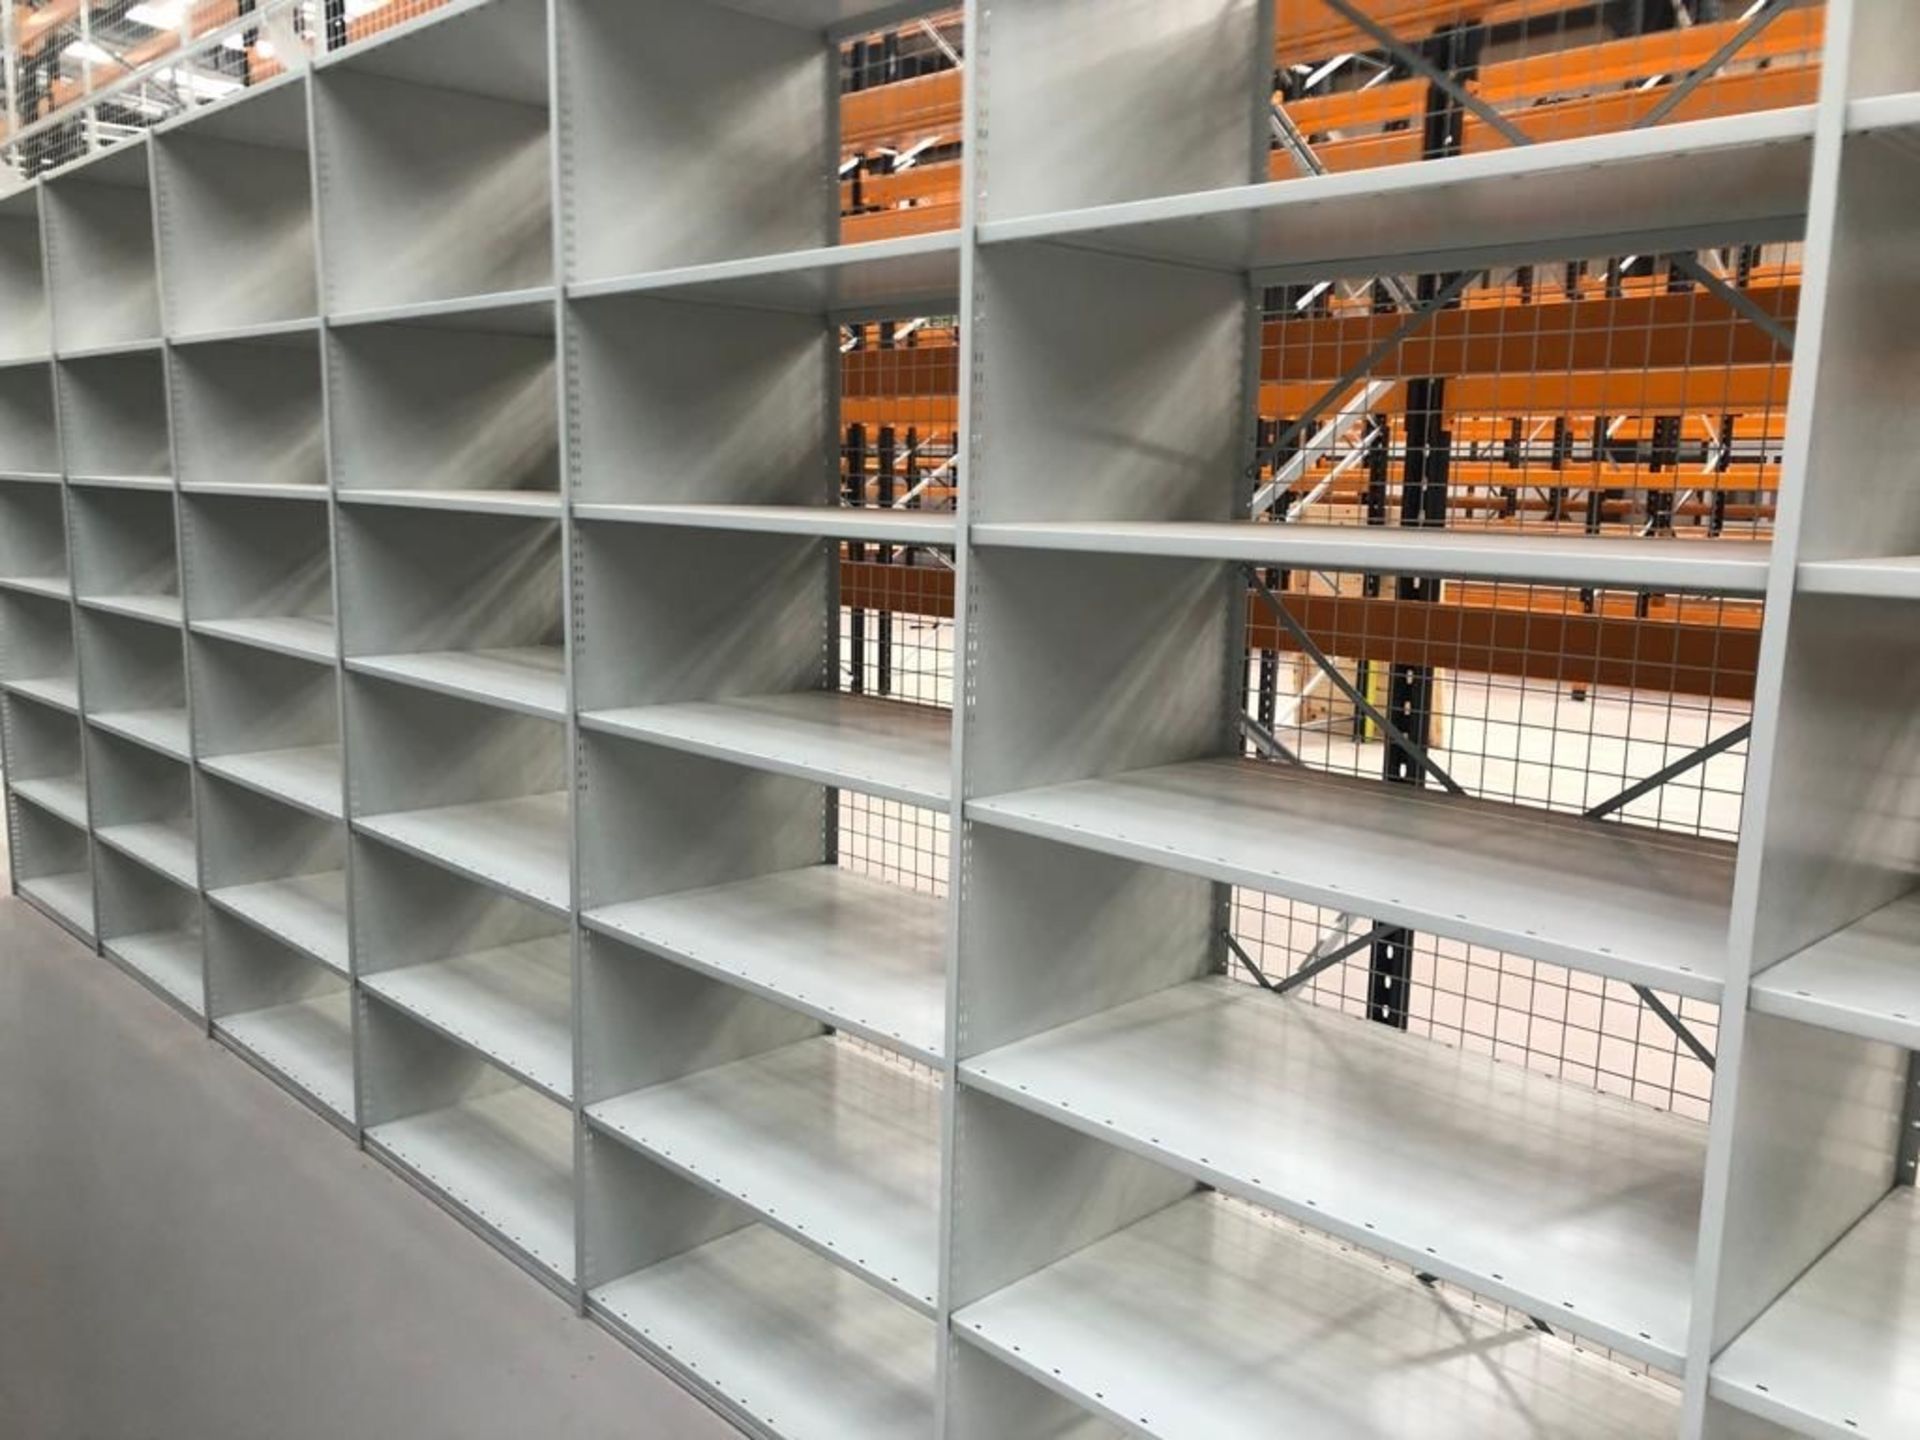 RRP £ 1728 Link Euro Shelving Lot To Contain 6 Bays, 6 Bays Include 7 Uprights@ 2500 High 600Mm - Image 2 of 4